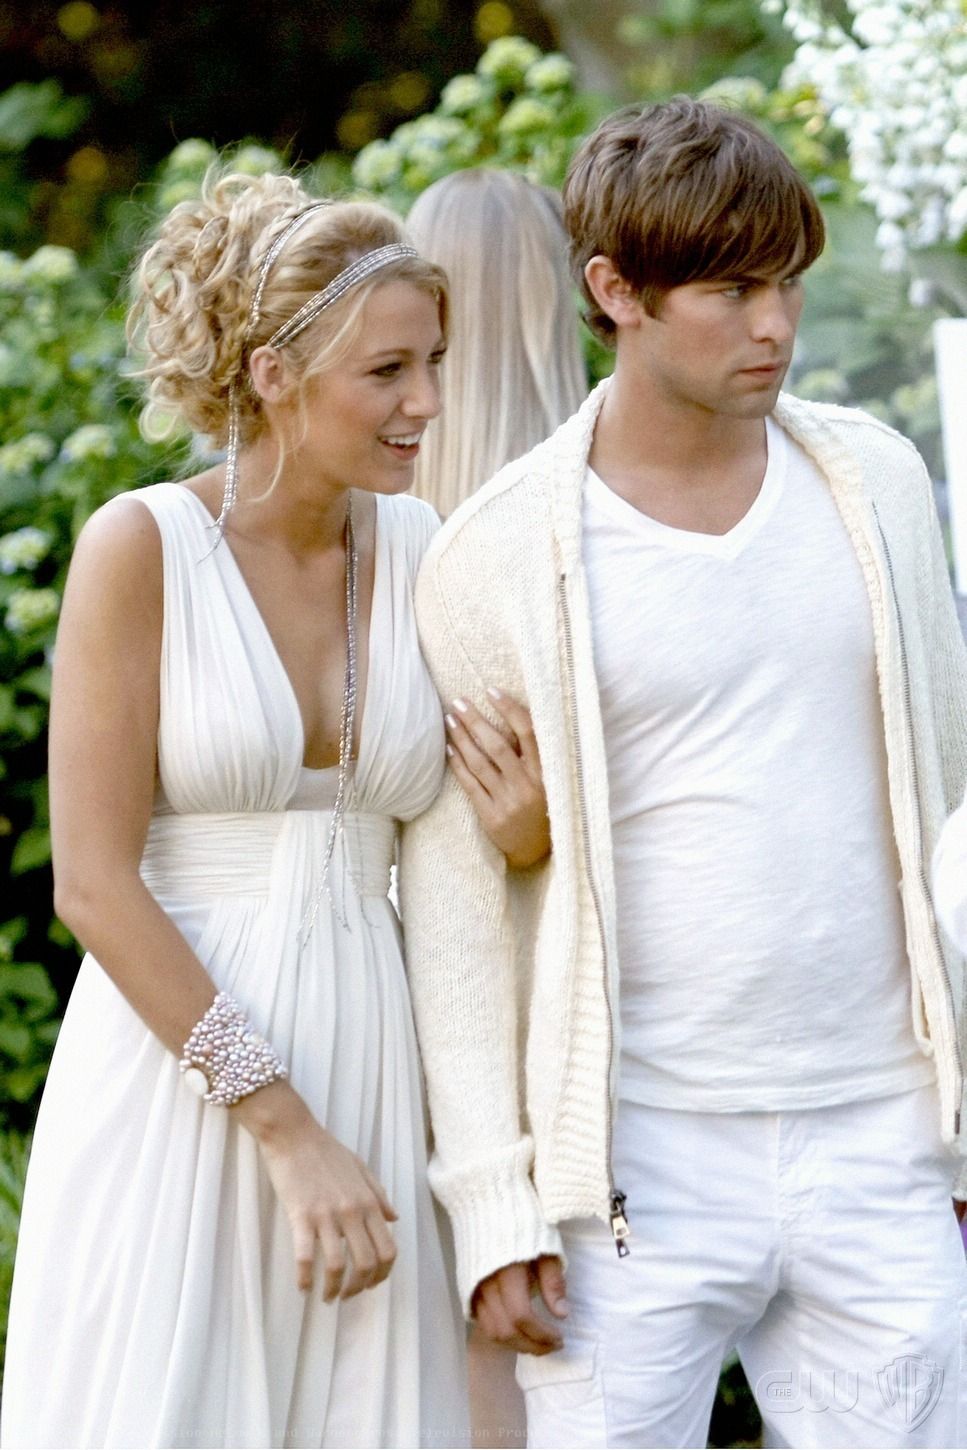 Google Image Result For Image Photos 6800000 Chace Blake Behind The Scenes 333 Serena And Nate 6836818 967